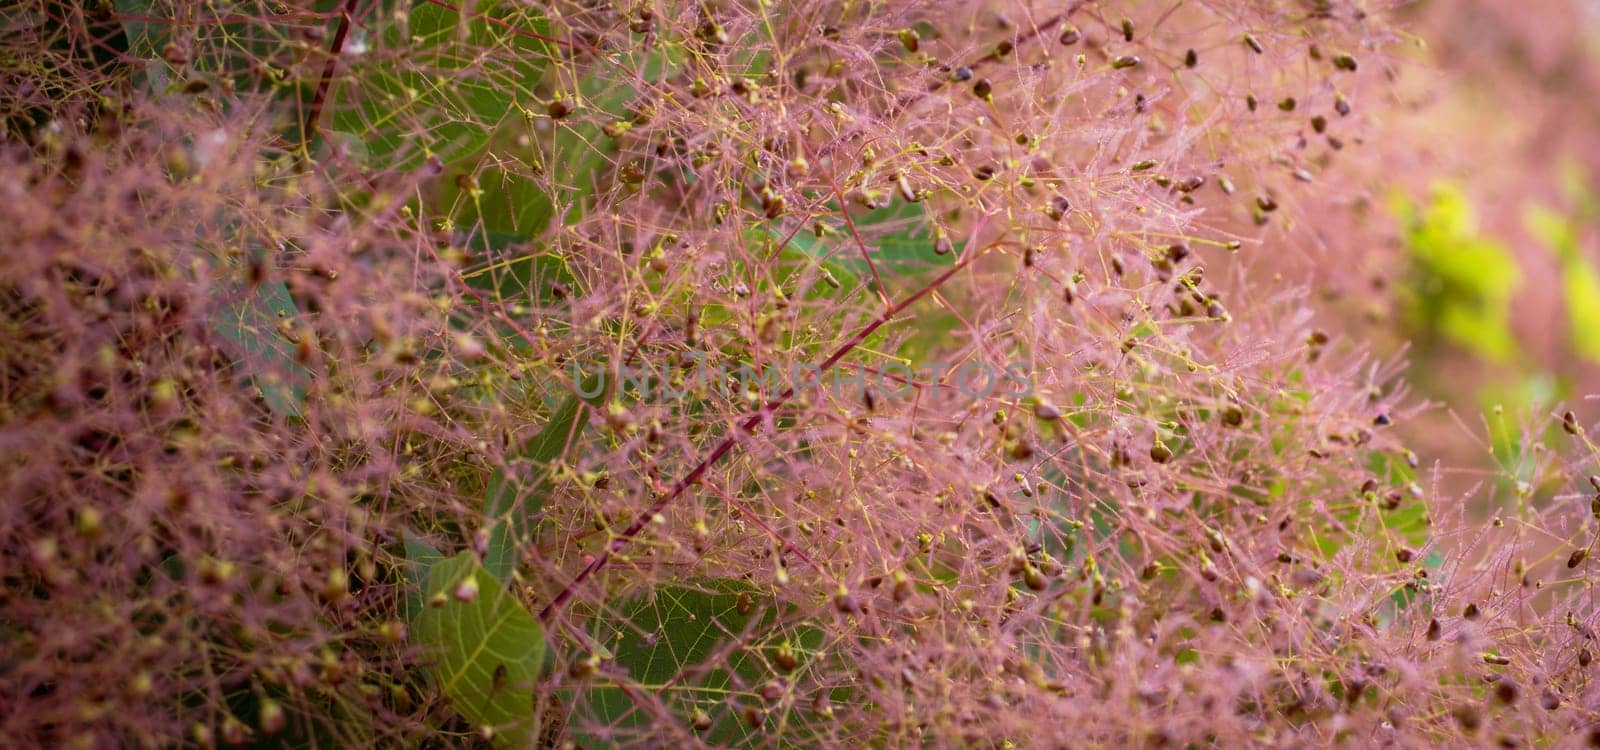 Bright Flowering Smoke Bush photo. Cotinus coggygria blossom bush photography. Royal purple smoke bush in the parkland. High quality picture for wallpaper